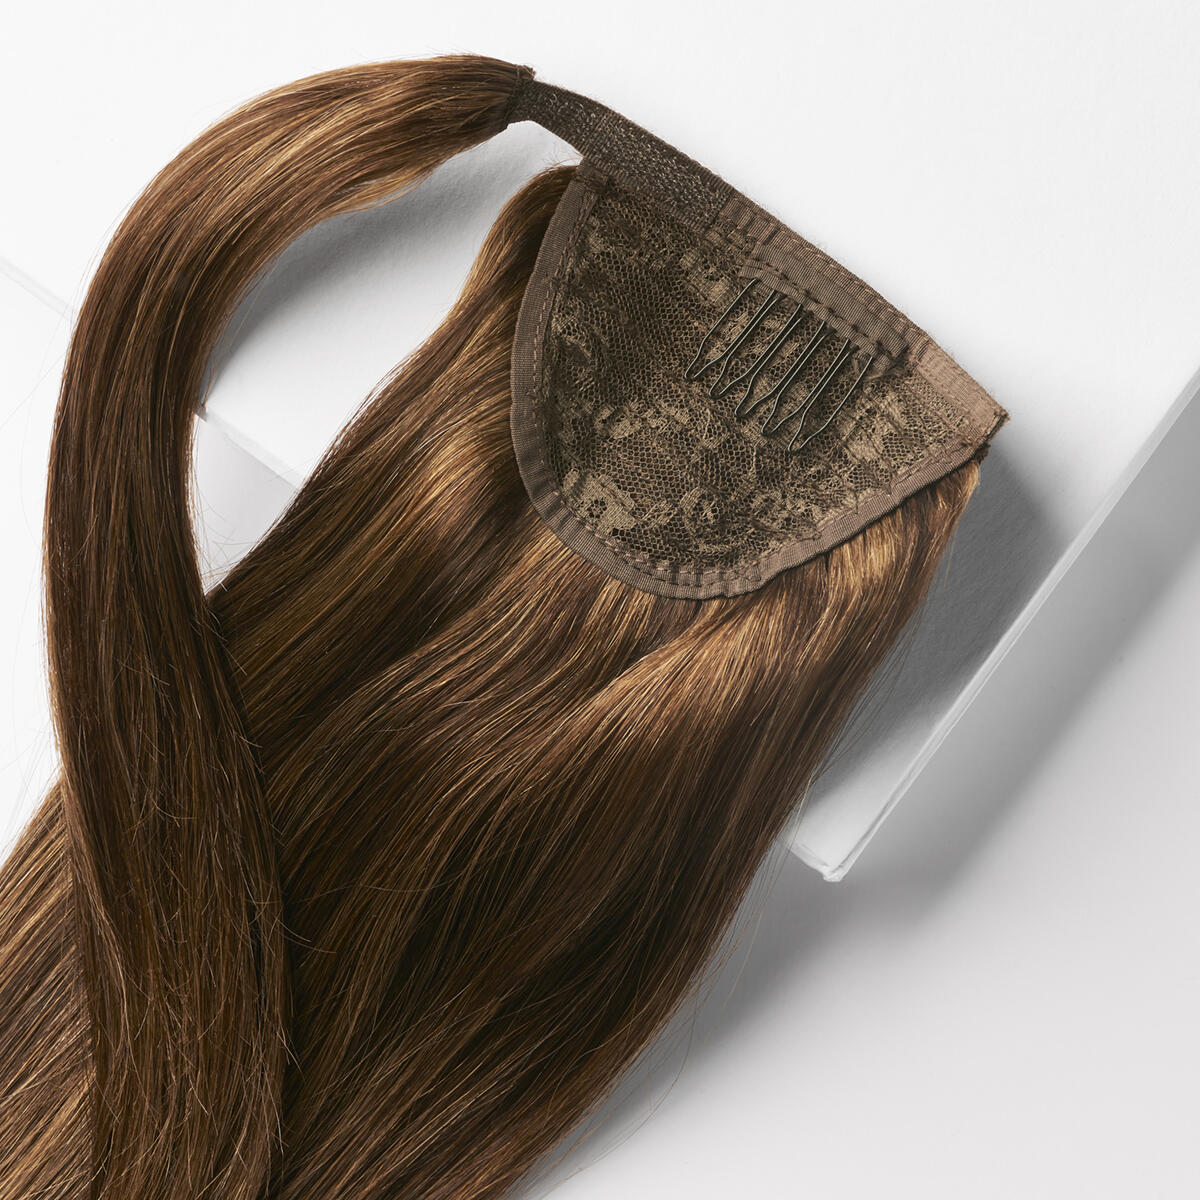 Clip-in Ponytail M2.3/5.0 Chocolate Mix 30 cm